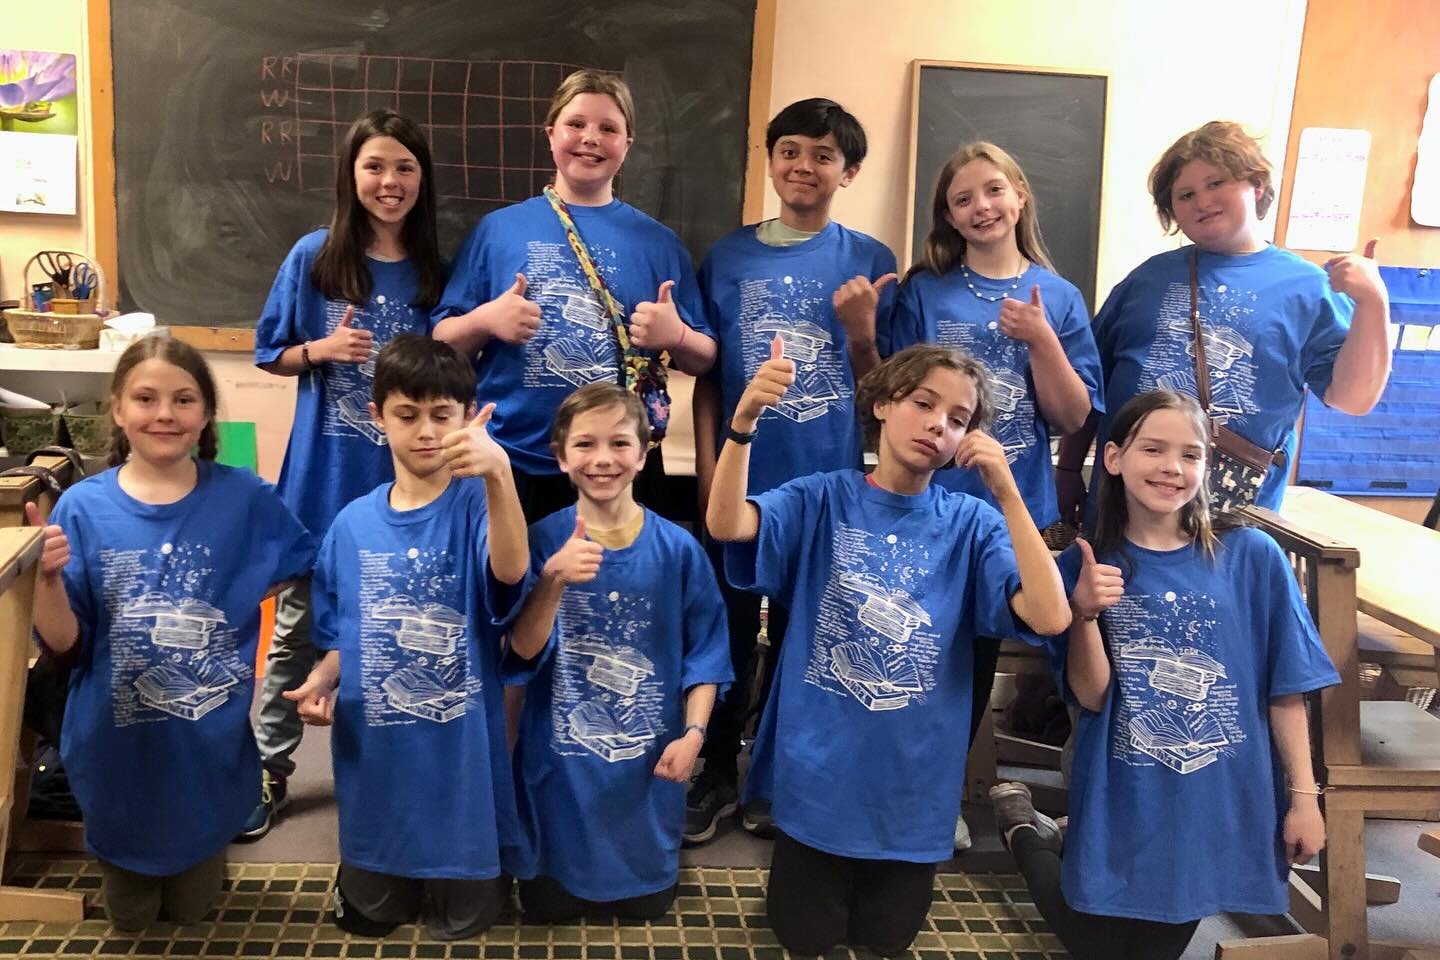 They&rsquo;re off!!! 

Good luck to our incredible team of 5th graders as they dive into the Battle of the Books competition! 📚🥇 We know you&rsquo;ll tackle each story with curiosity and courage.

These students have immersed themselves in such an 